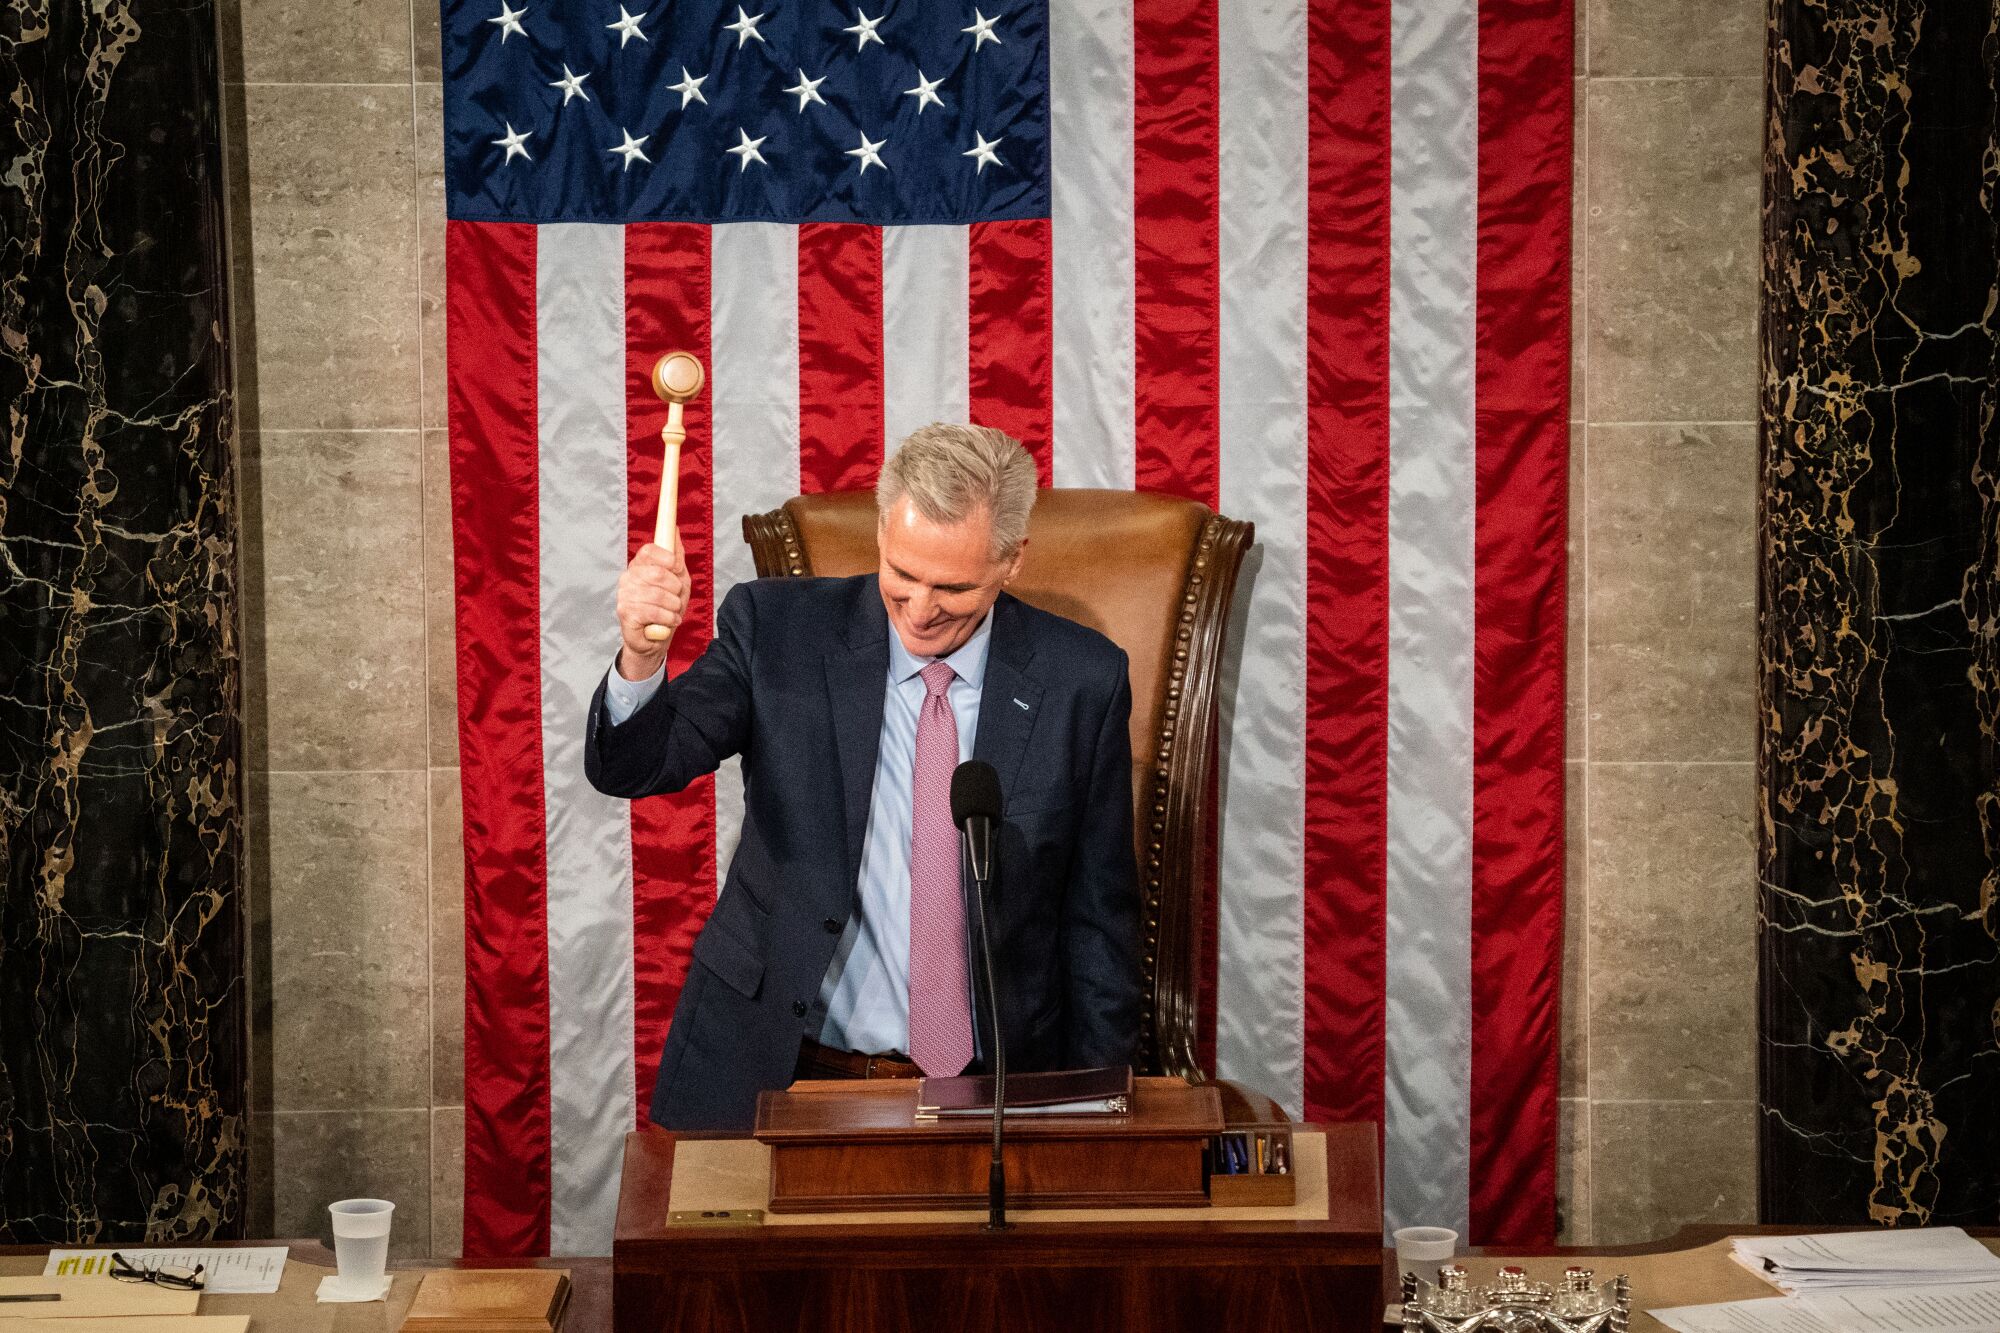 Kevin McCarthy prepares to bang the gavel while standing before the House chamber